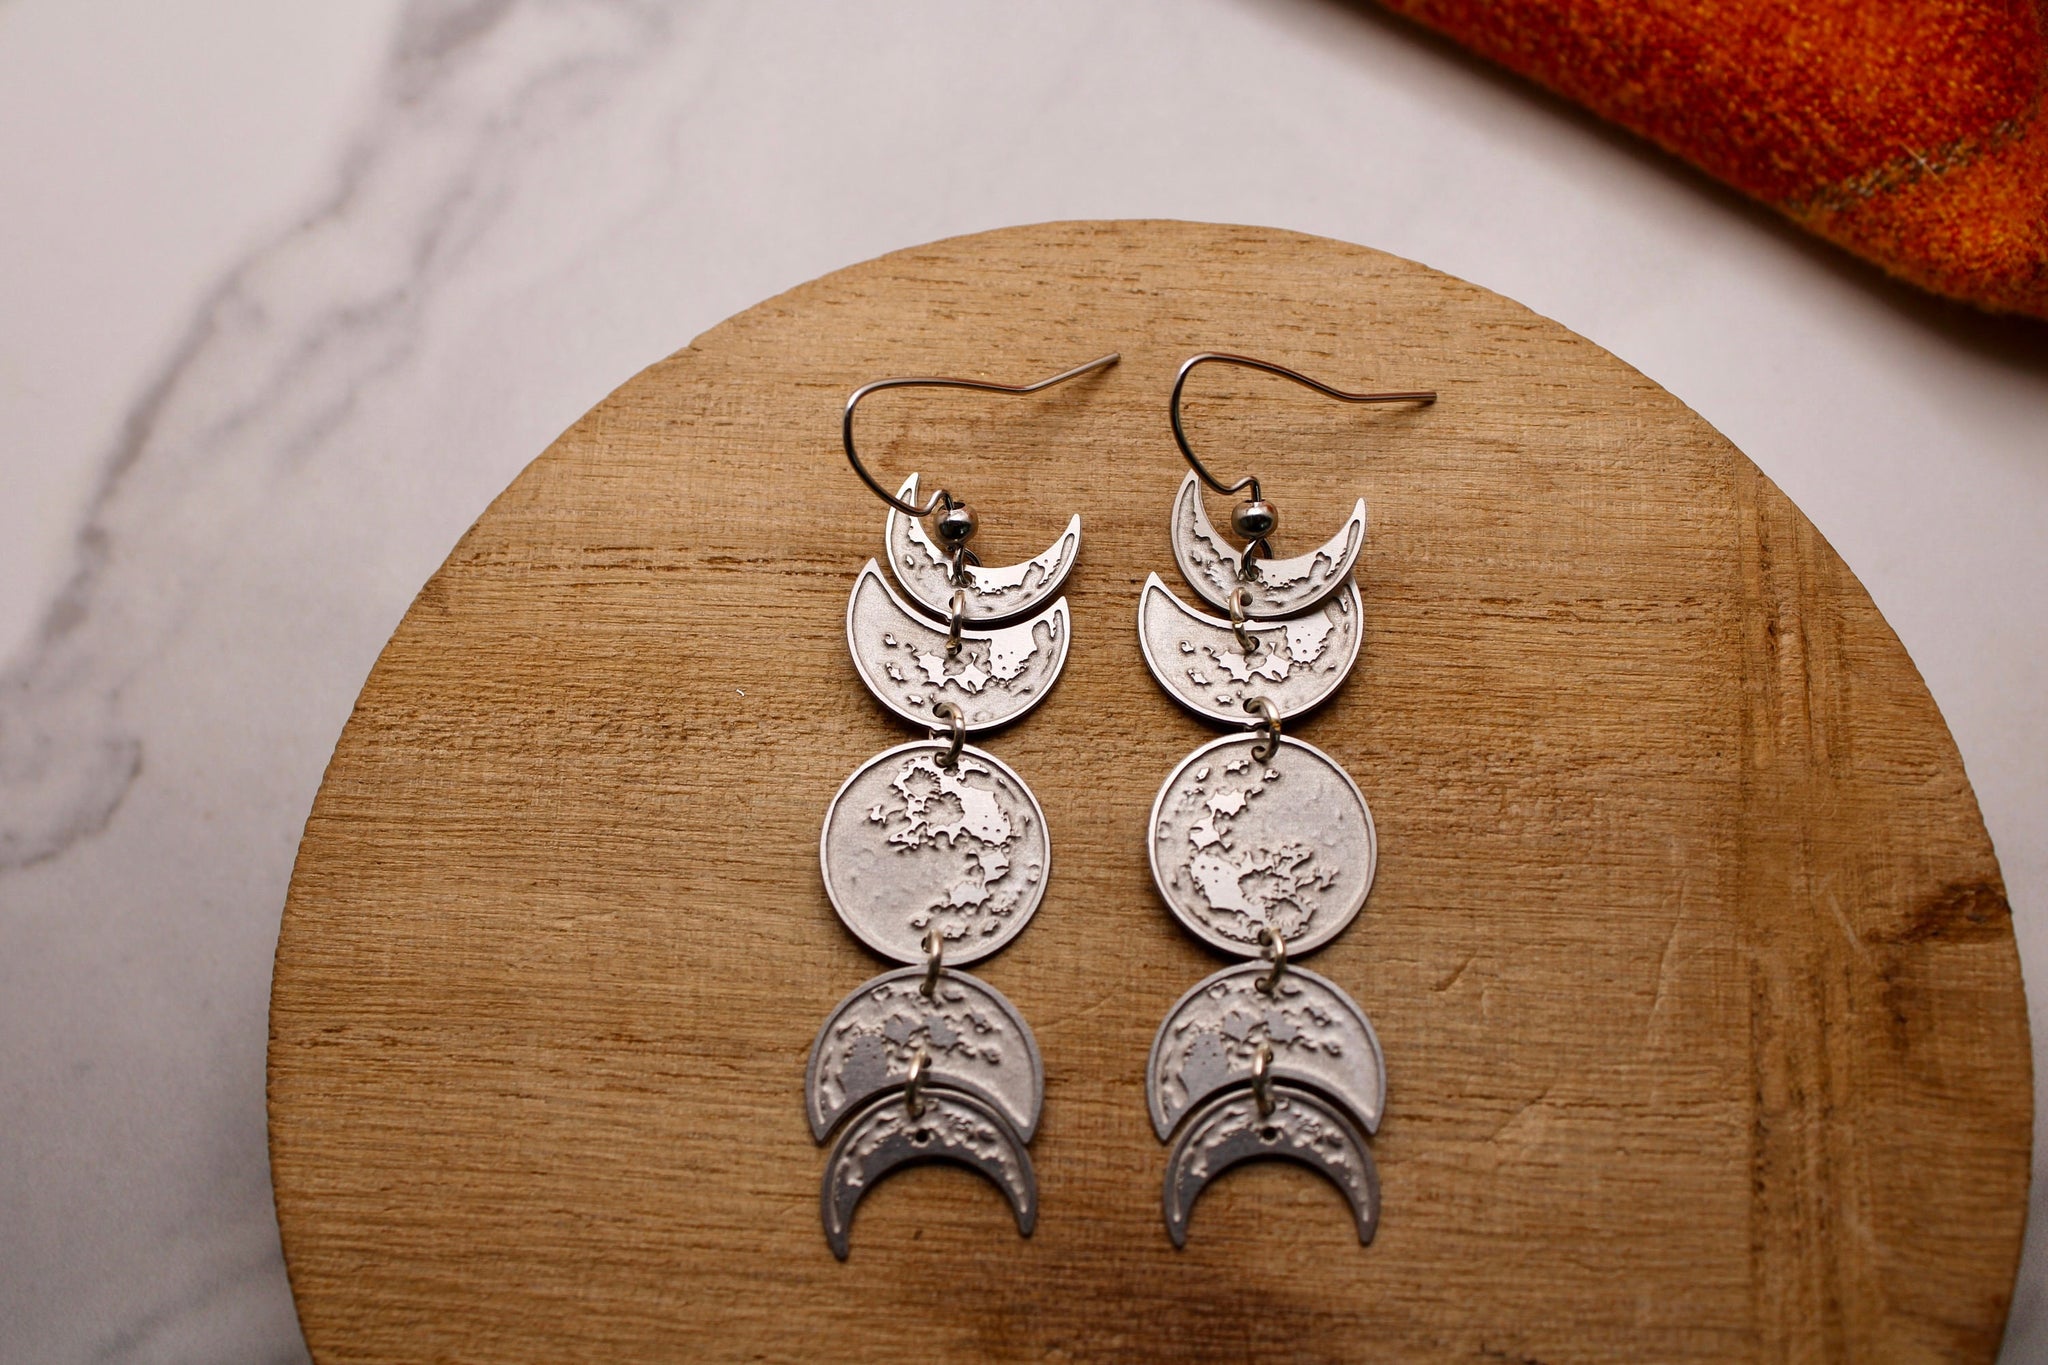 moon phase dangle earrings, silver statement earrings, long earrings, moon phase, lunar, gift, gift for her, holiday, jewelry, full moon